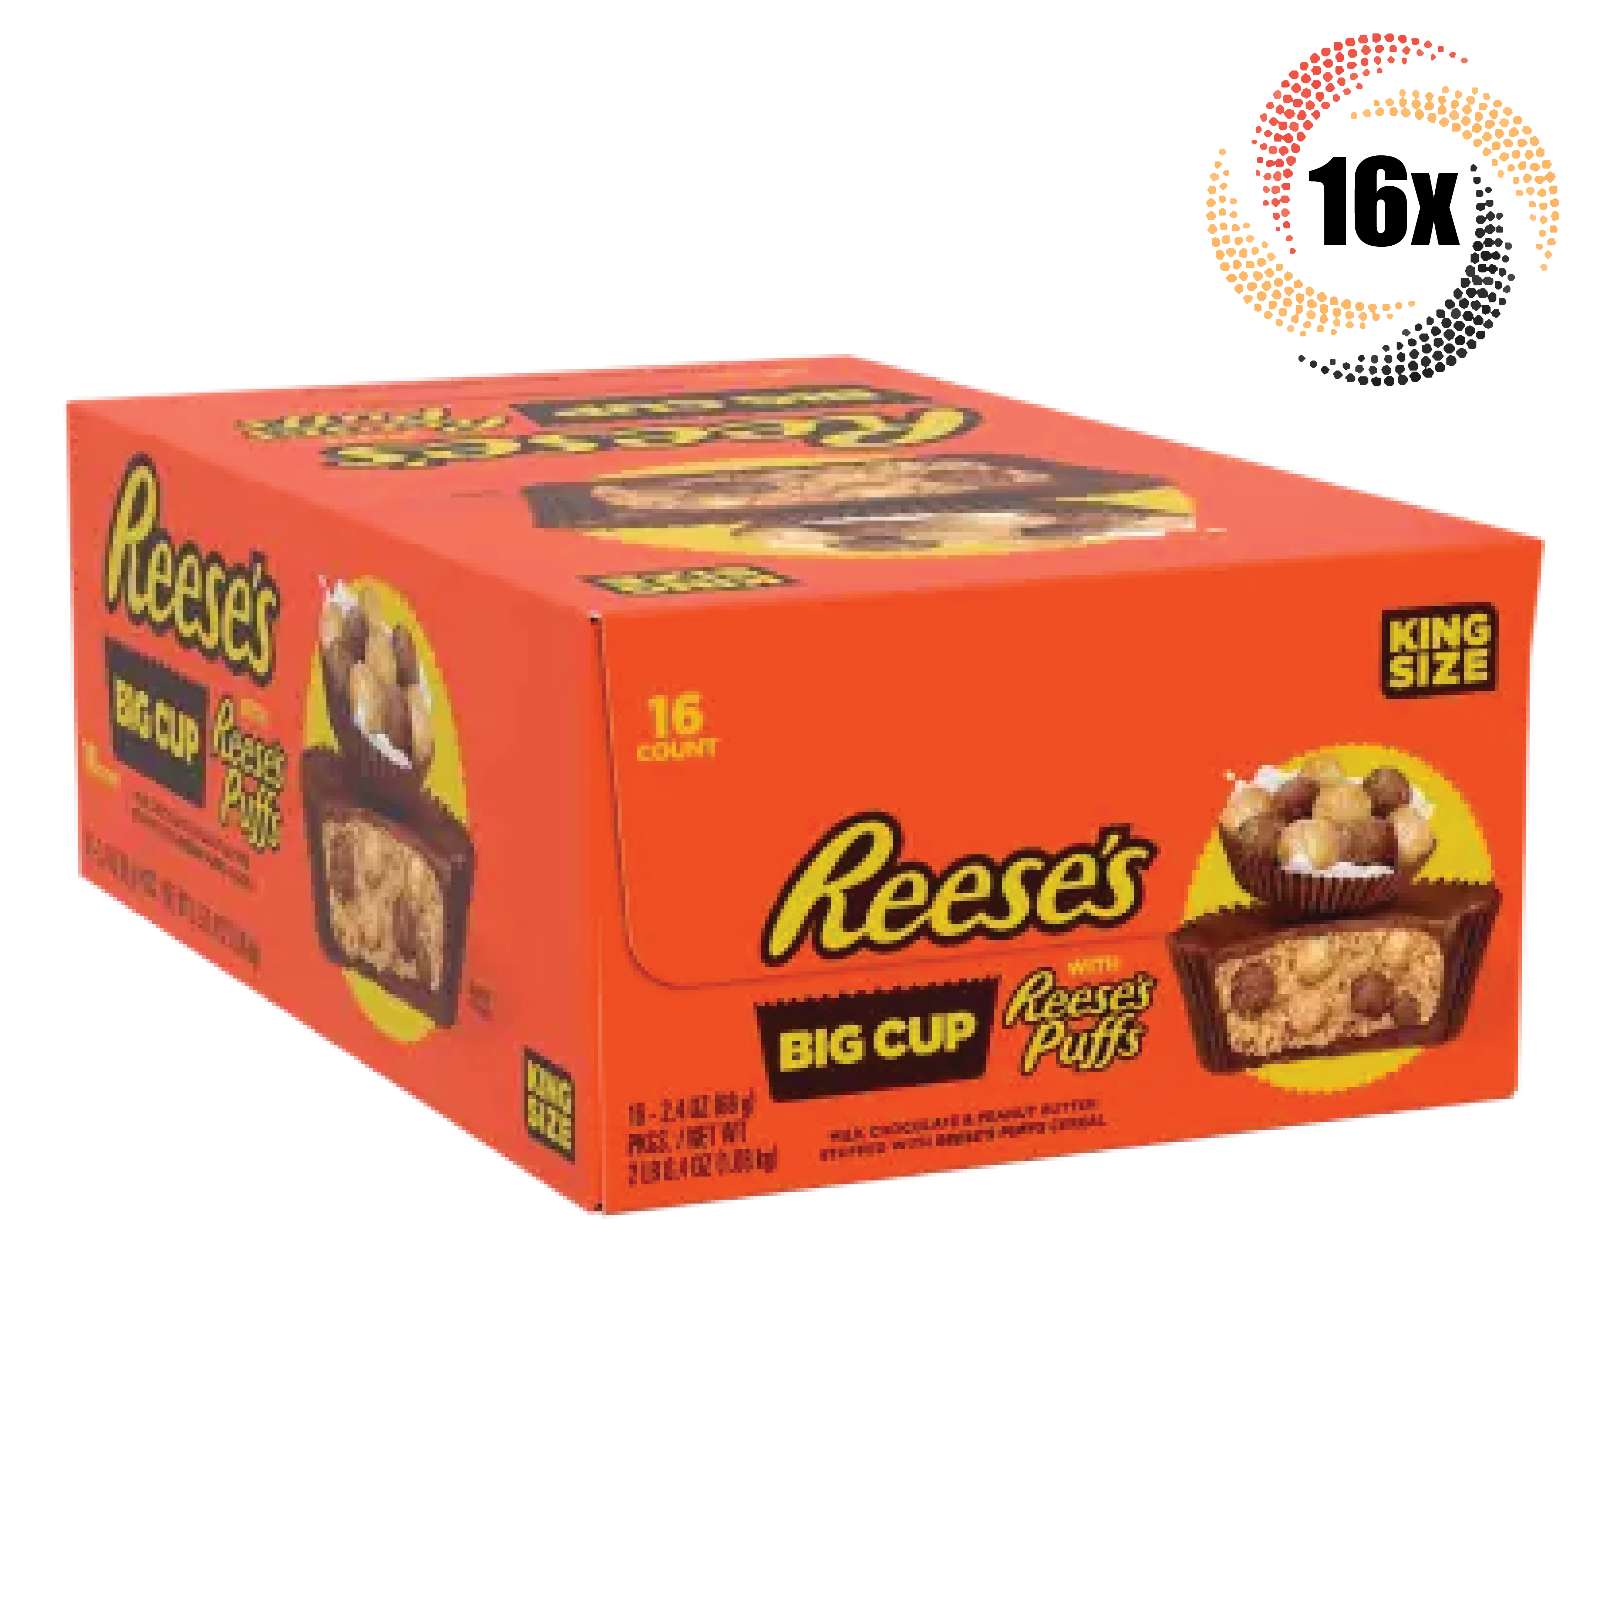 Primary image for Full Box 16x Packs Reese's Puffs King Size Big Cups | 2 Cups Per Pack | 2.4oz